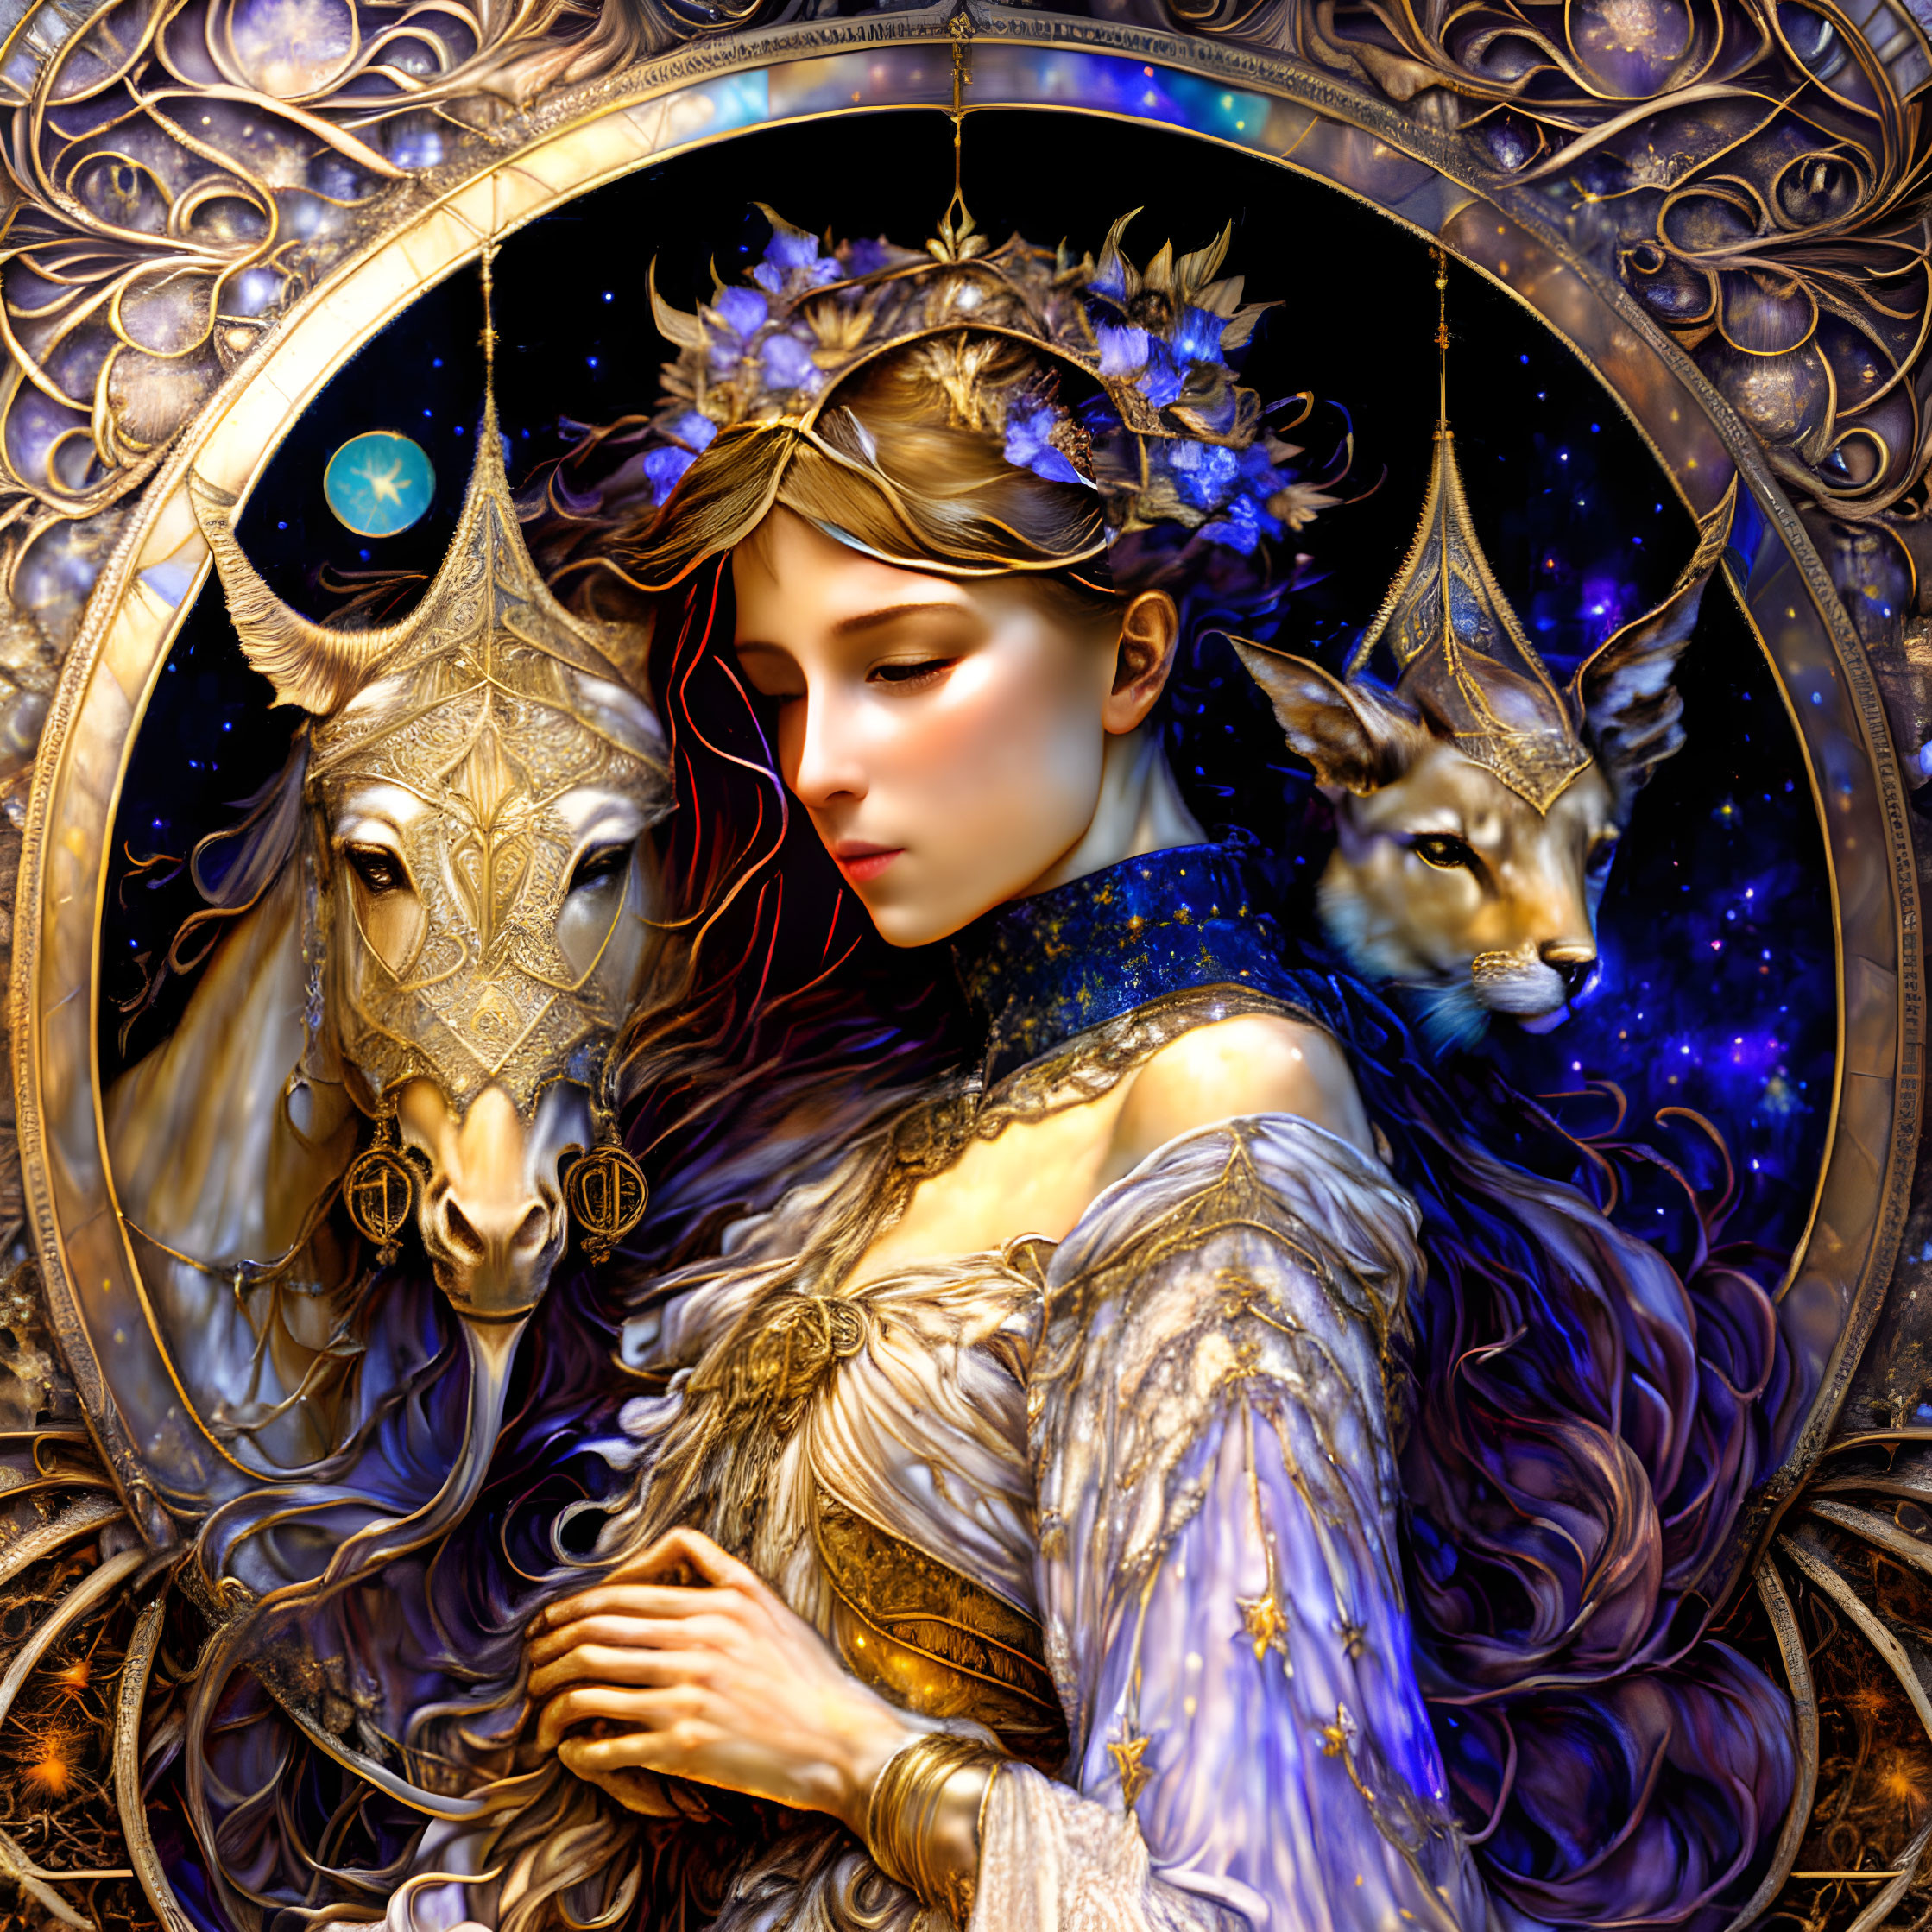 Fantasy artwork: Woman with starry aura, golden horse, and mystical feline in ornate